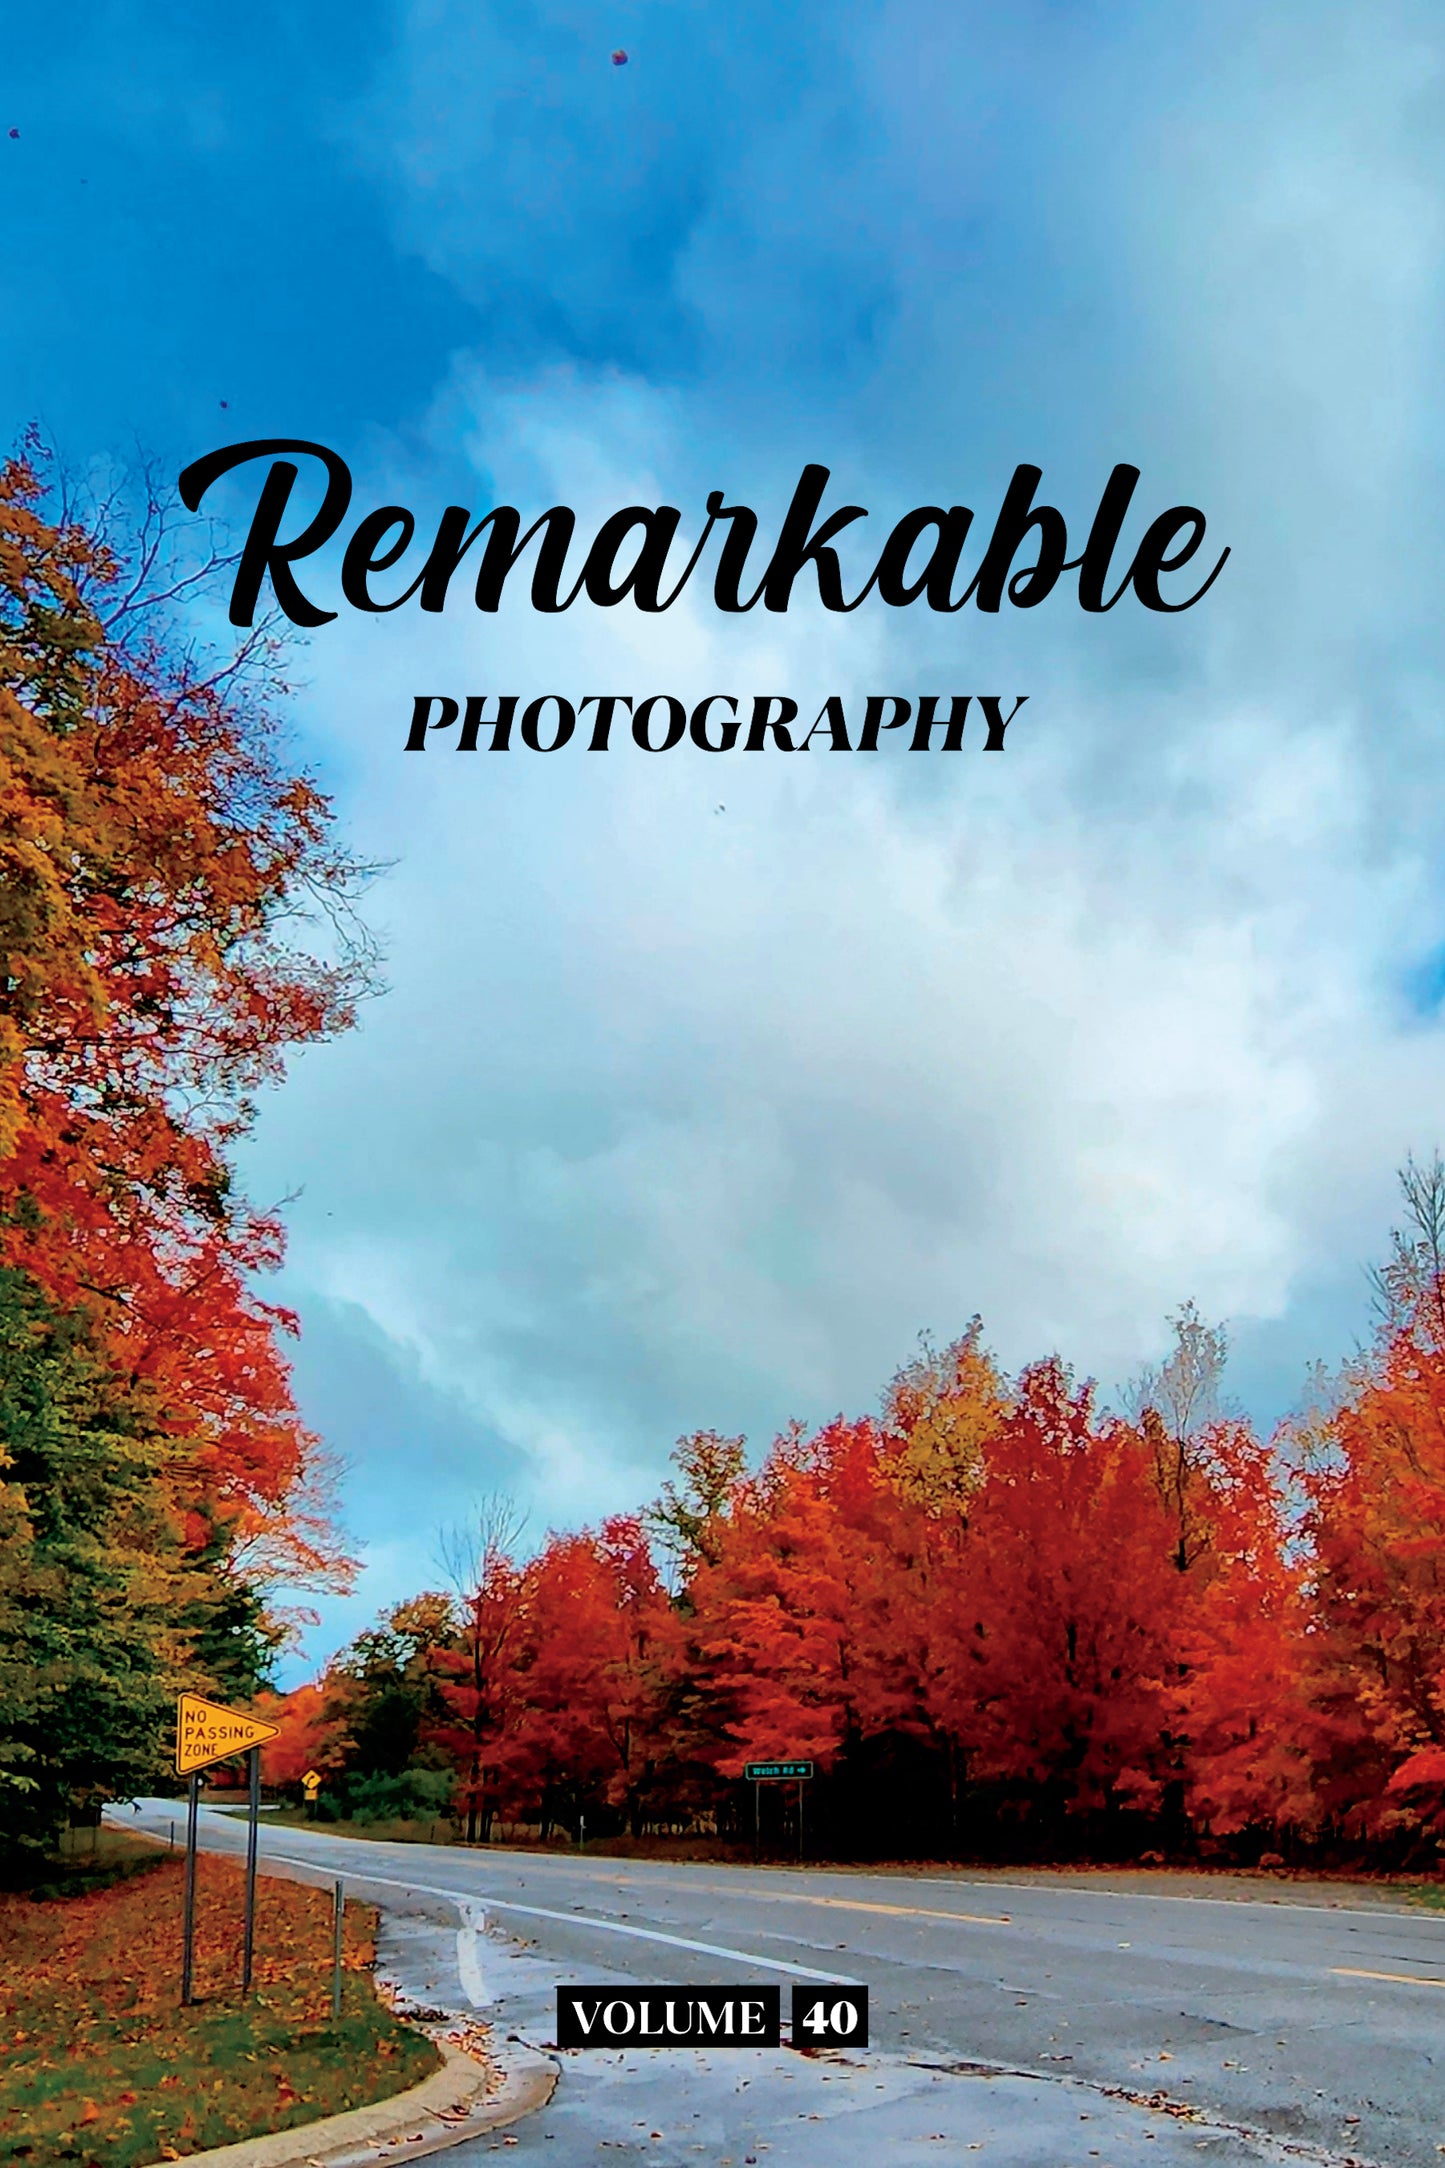 Remarkable Photography Volume 40 (Physical Book Pre-Order)